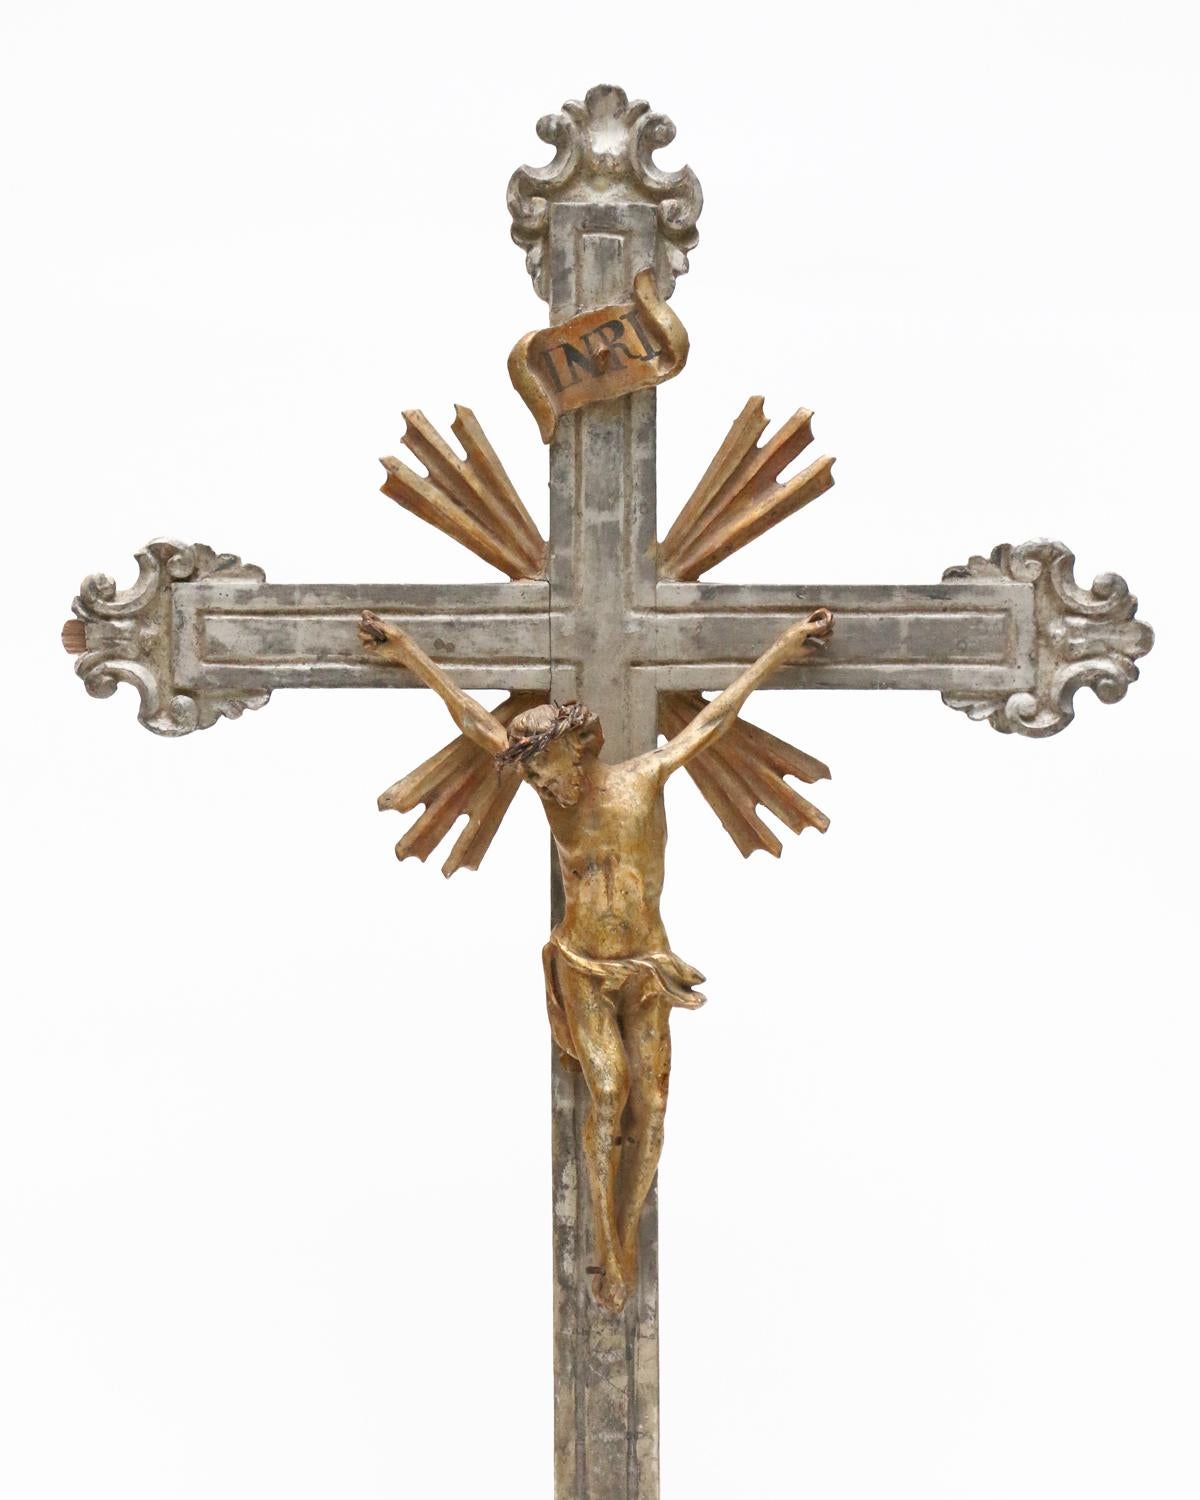 18th century Italian hand-carved silver leaf crucifix with a gold leaf figure of Christ and sunrays on a large calcite crystal in matrix base. 

The calcite crystal is from Elmwood Mine, Tennessee.  It is an example of the world's finest